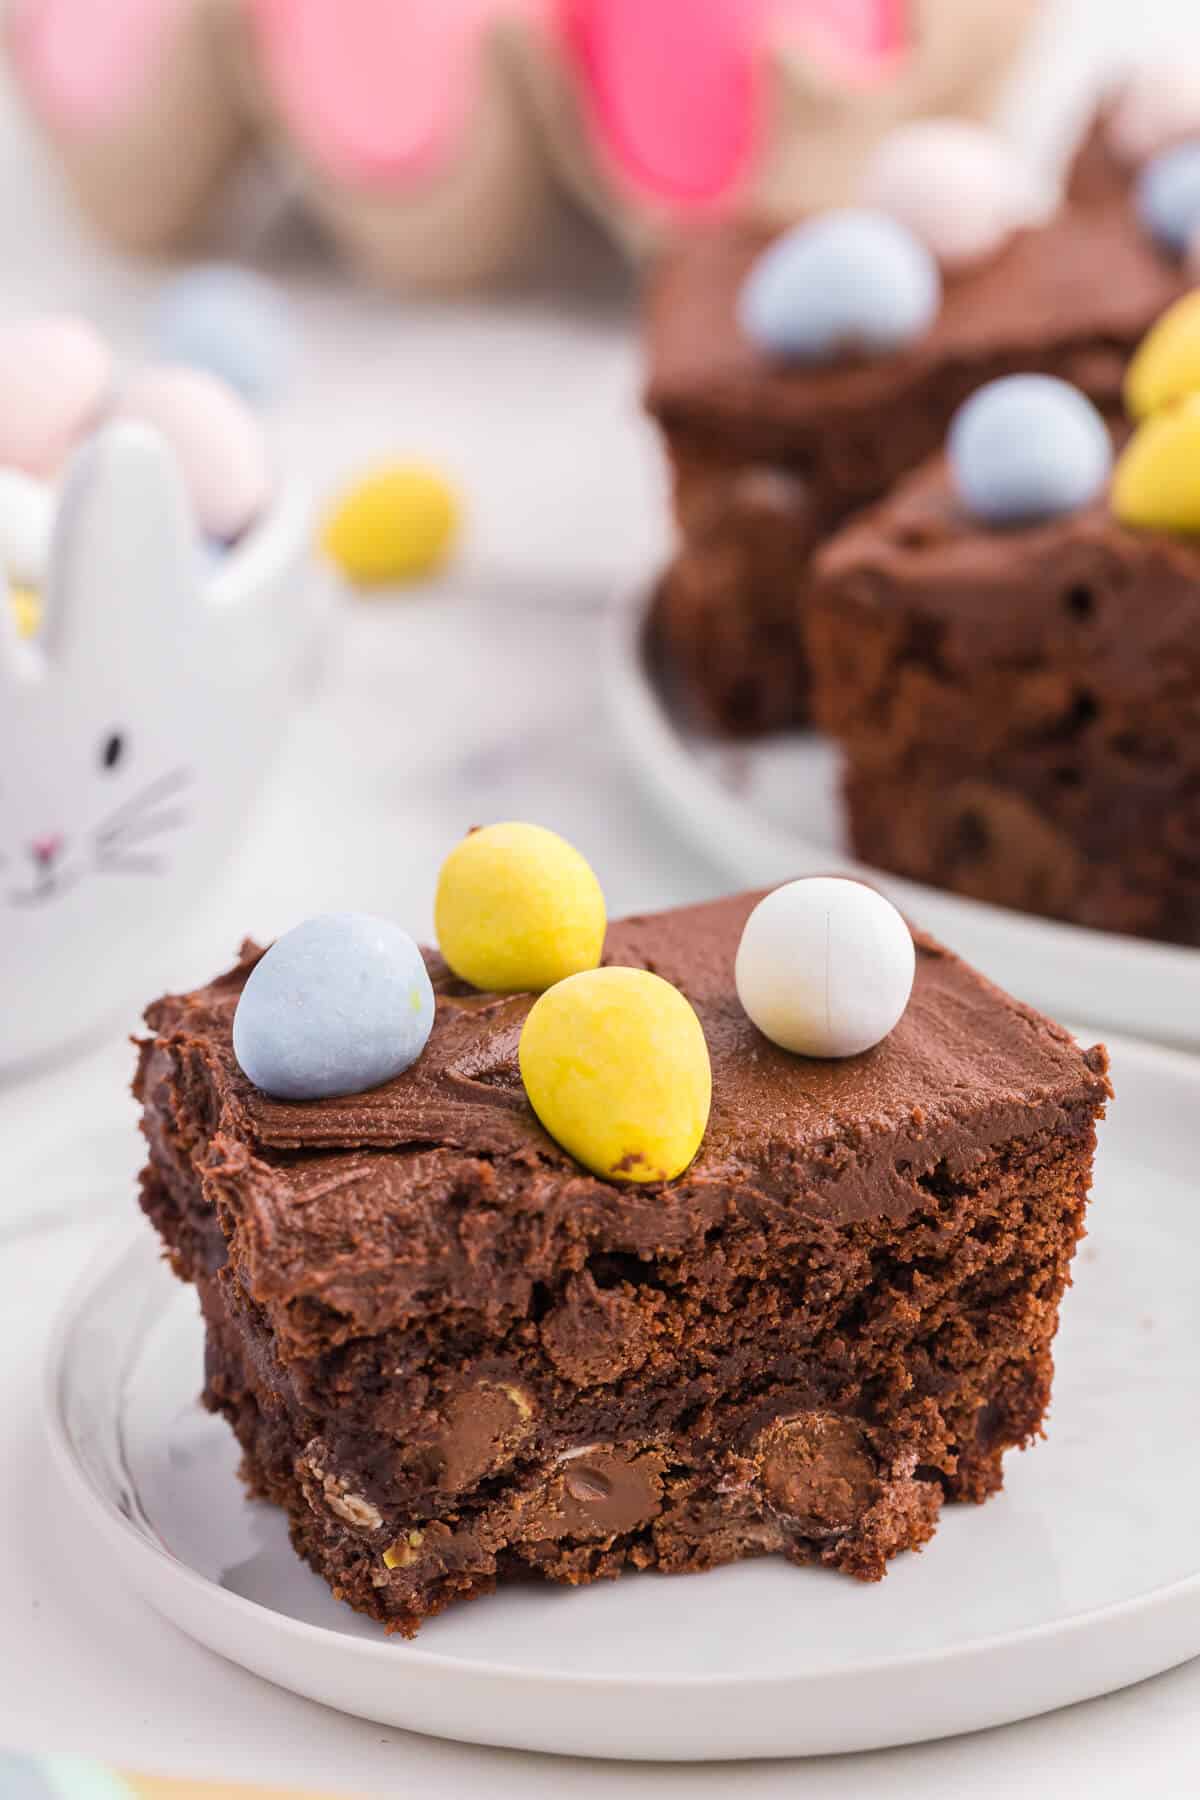 A Easter Mini Egg Brownie on a plate.